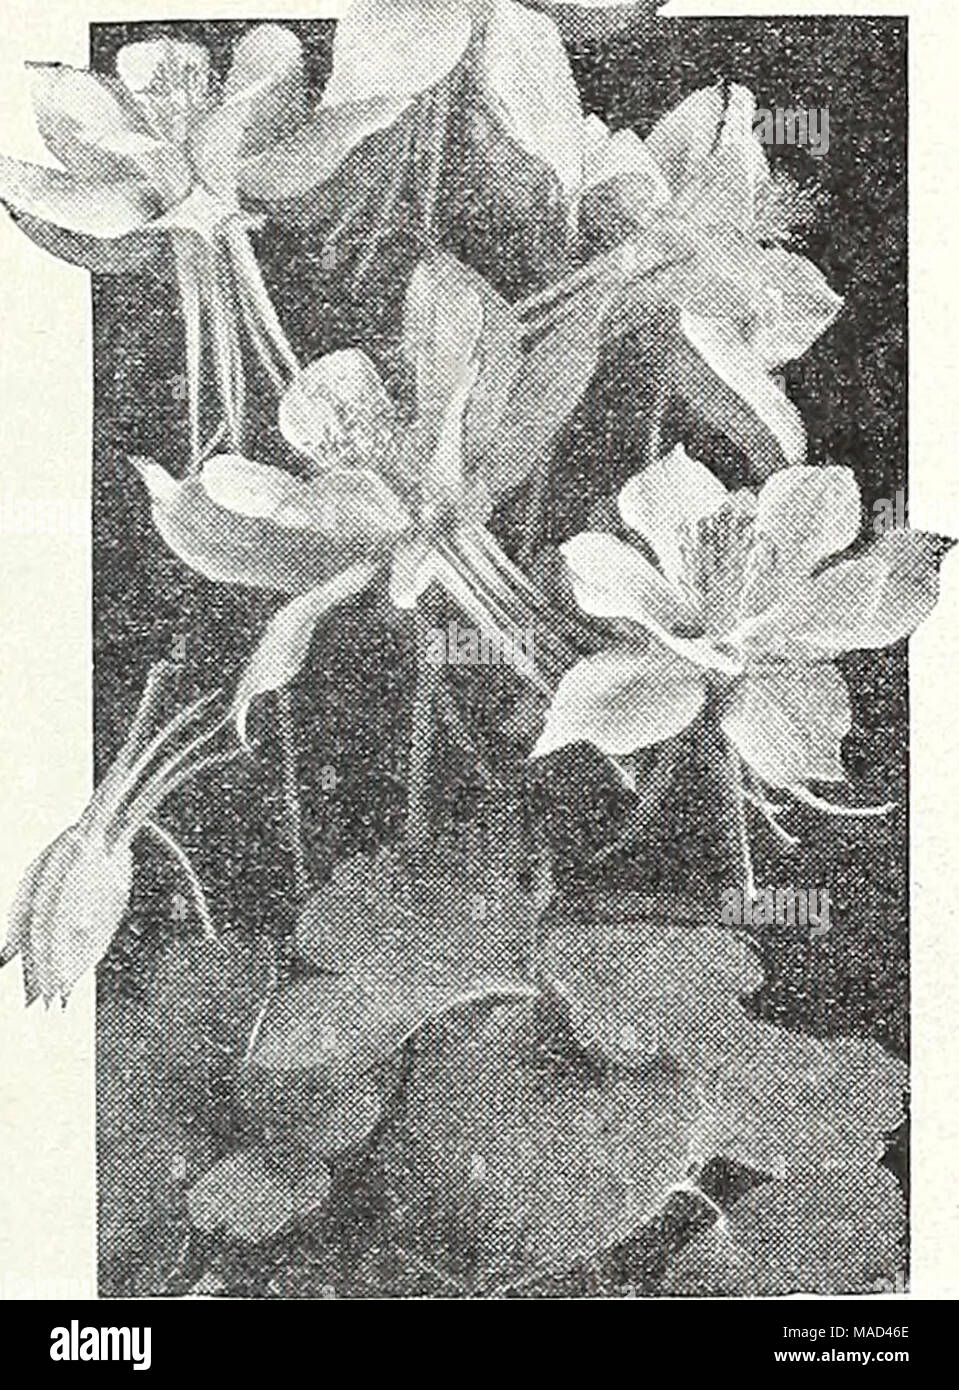 . Dreer's wholesale catalog for florists and market gardeners : 1943 winter - spring - summer . Dreer's Long-Spurred Columbines Aquilegia—Columbine 1201 Alpina. Rich blue 40 1203 Canadensis. Red and yellow 50 1213 Coerulea. Violet-blue and white 40 1207 Double-Flowering Mixed 25 Dreer's Long-Spurred Columbines 1211 Chrysantha. Golden yellow 40 1224 Copper Queen. Copper, straw yellow corolla 50 1225 Pink and Rose Shades 50 1221 Blue and Lavender Shades 50 1228 Snow Queen. White 50 1230 Finest Mixed • 50 1229 Mrs. Scott Elliott Strain. Soft pastel shades 50 1220 Dobbies Imperial Mixed 50 1216 Lo Stock Photo